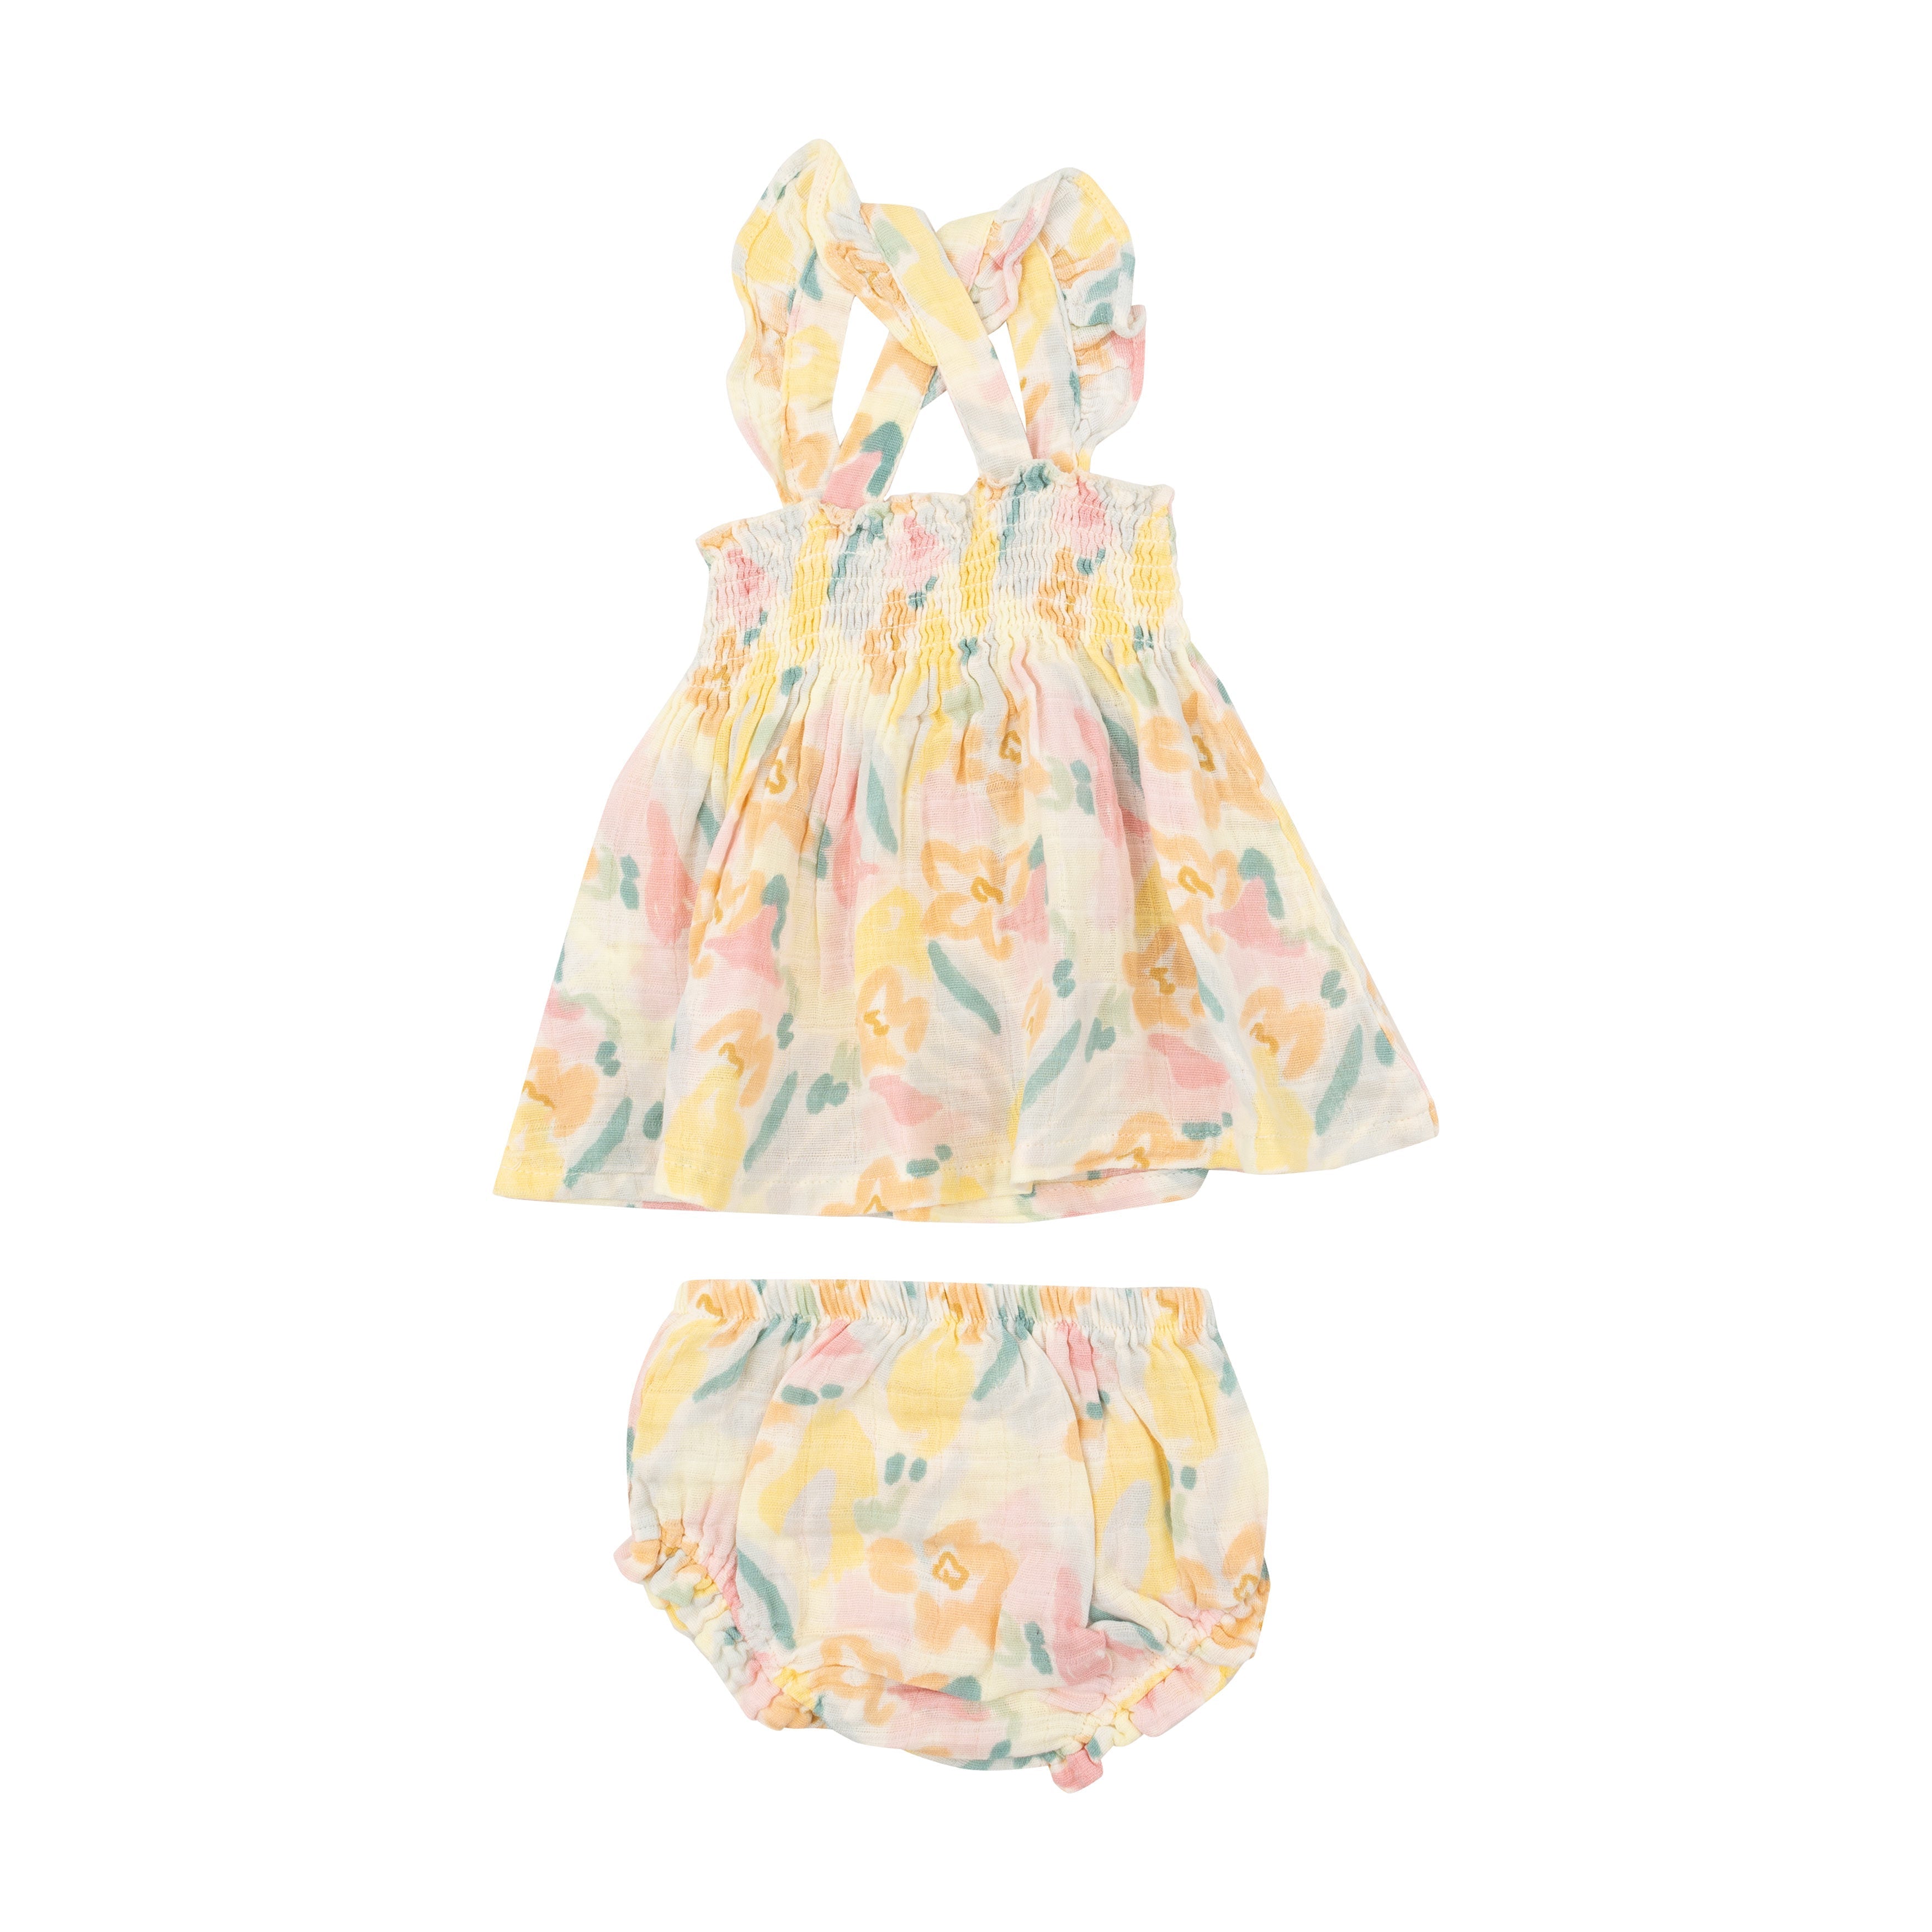 Ruffle Strap Smocked Top And Diaper Cover - Paris Bouquet